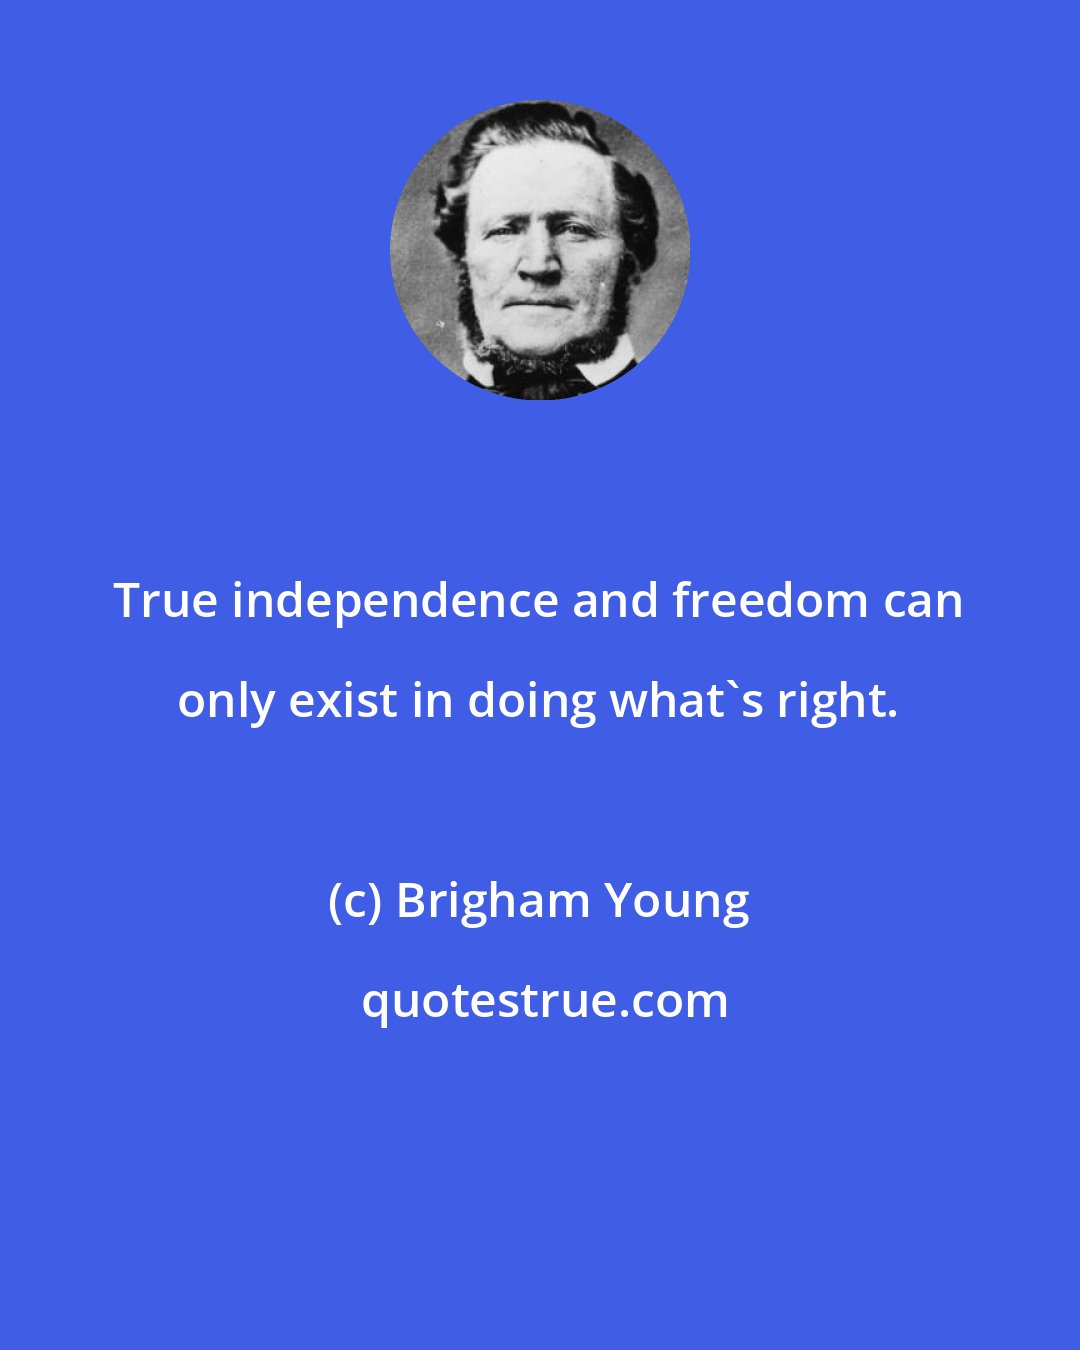 Brigham Young: True independence and freedom can only exist in doing what's right.